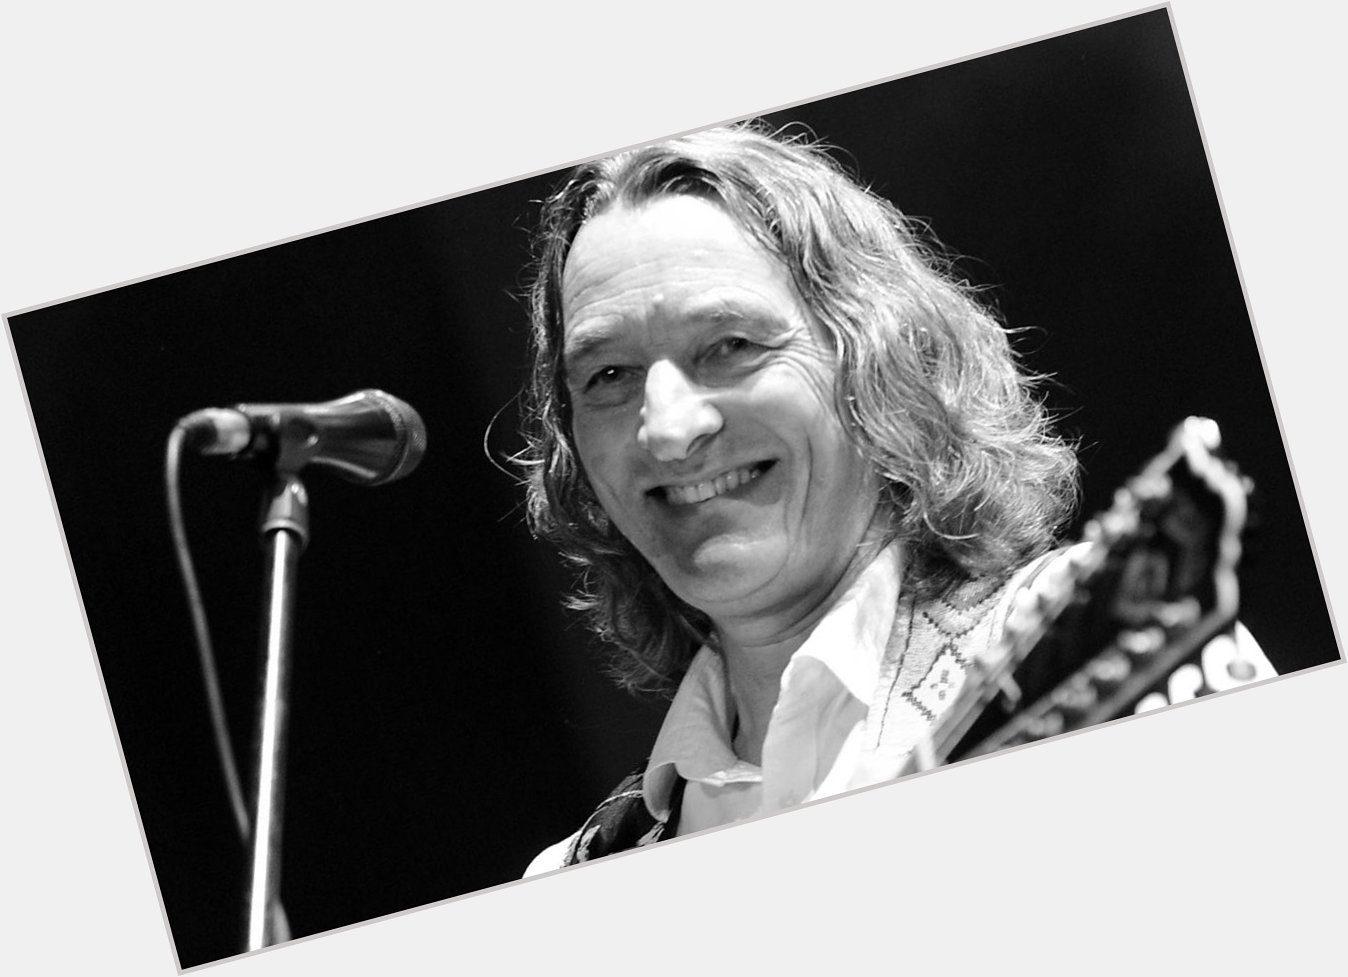 Happy birthday to Roger Hodgson, who is 67 today! 